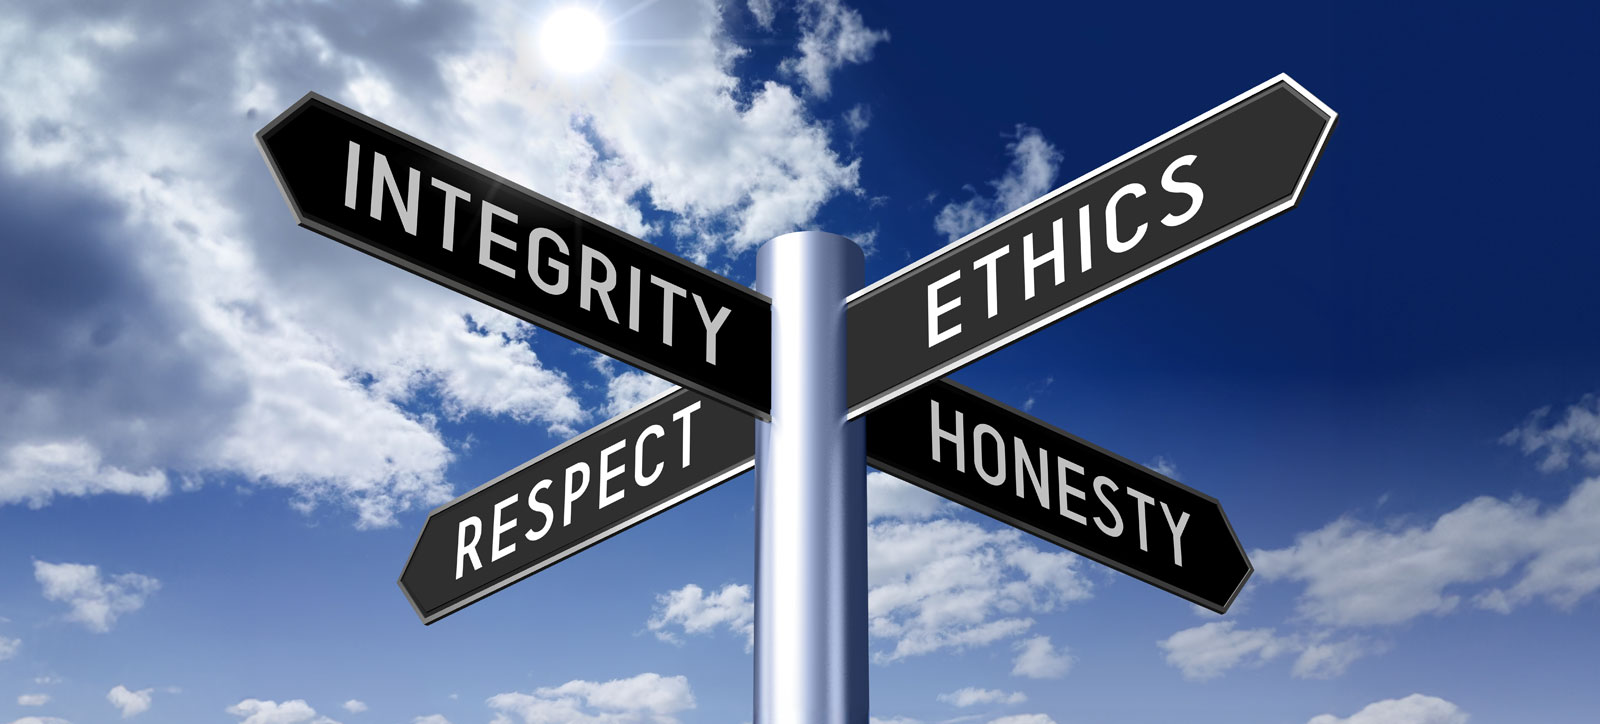 Four directions on a moral signpost - ethics, integrity, honest, and respect